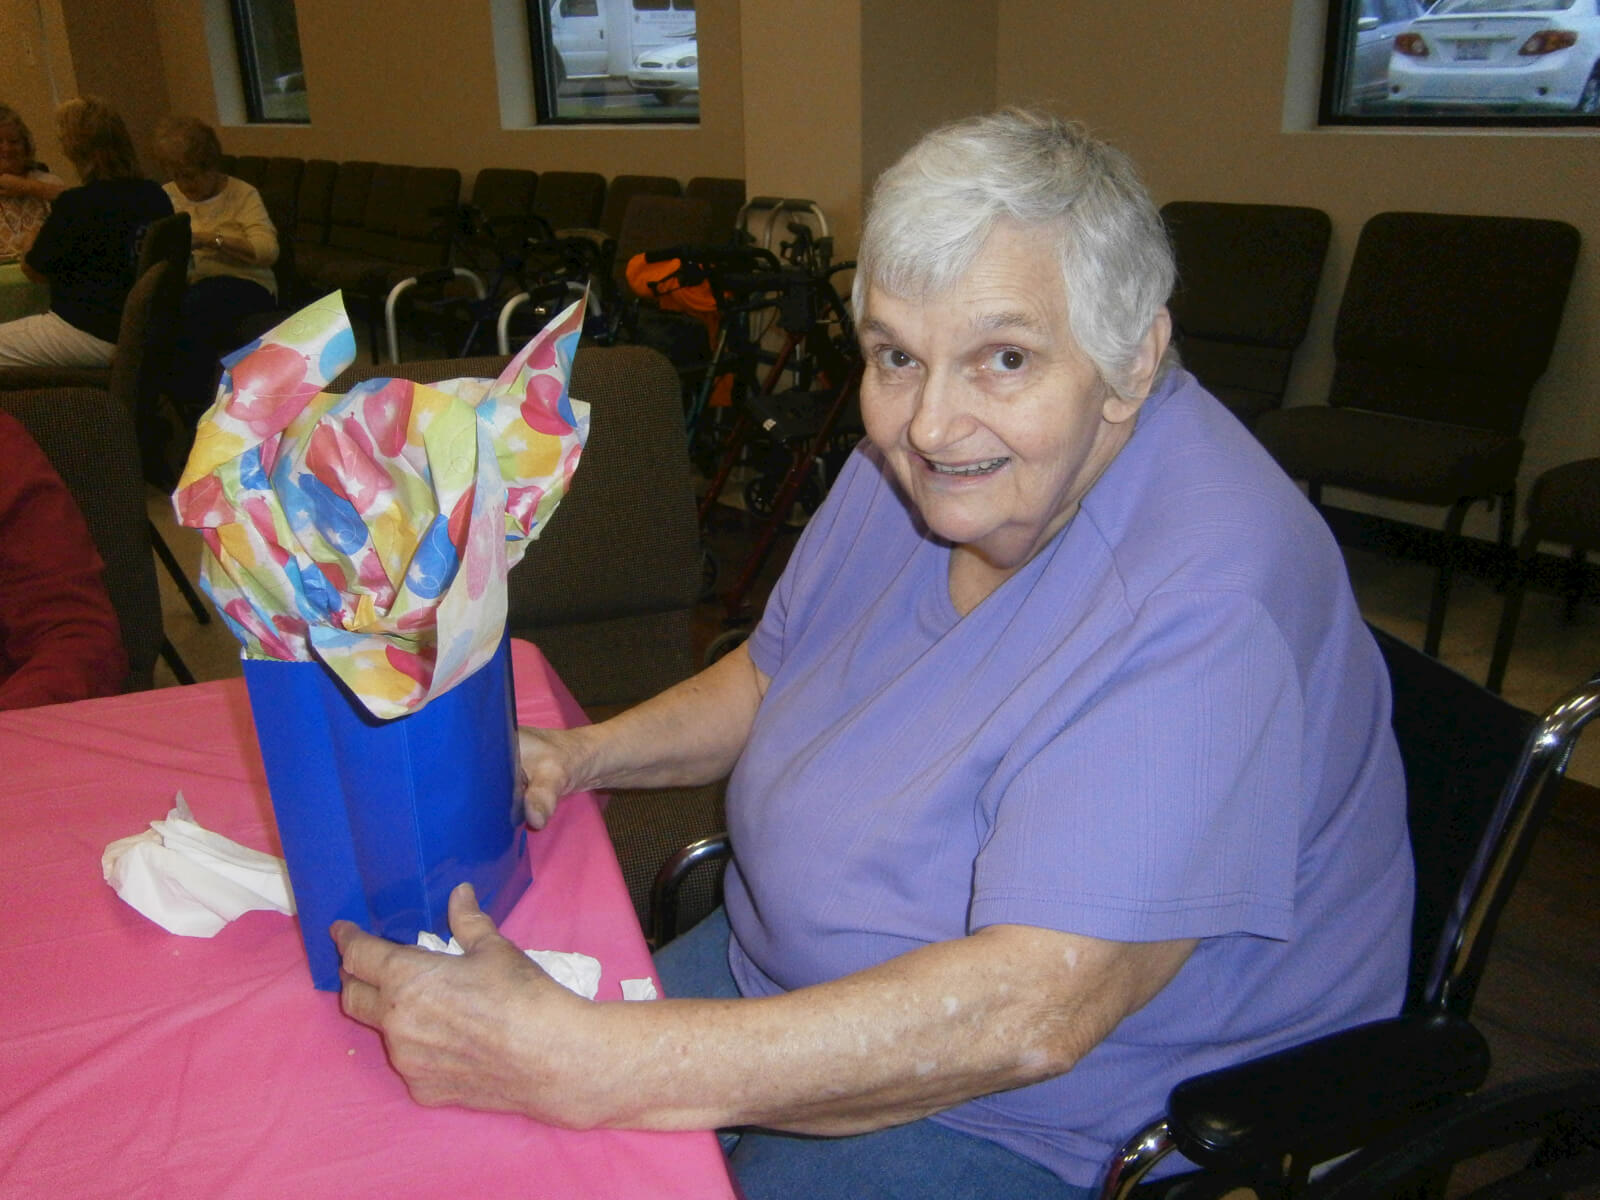 Wexford House resident Glenda McFalls receives a present at the 2nd Annual Magical Birthday Party